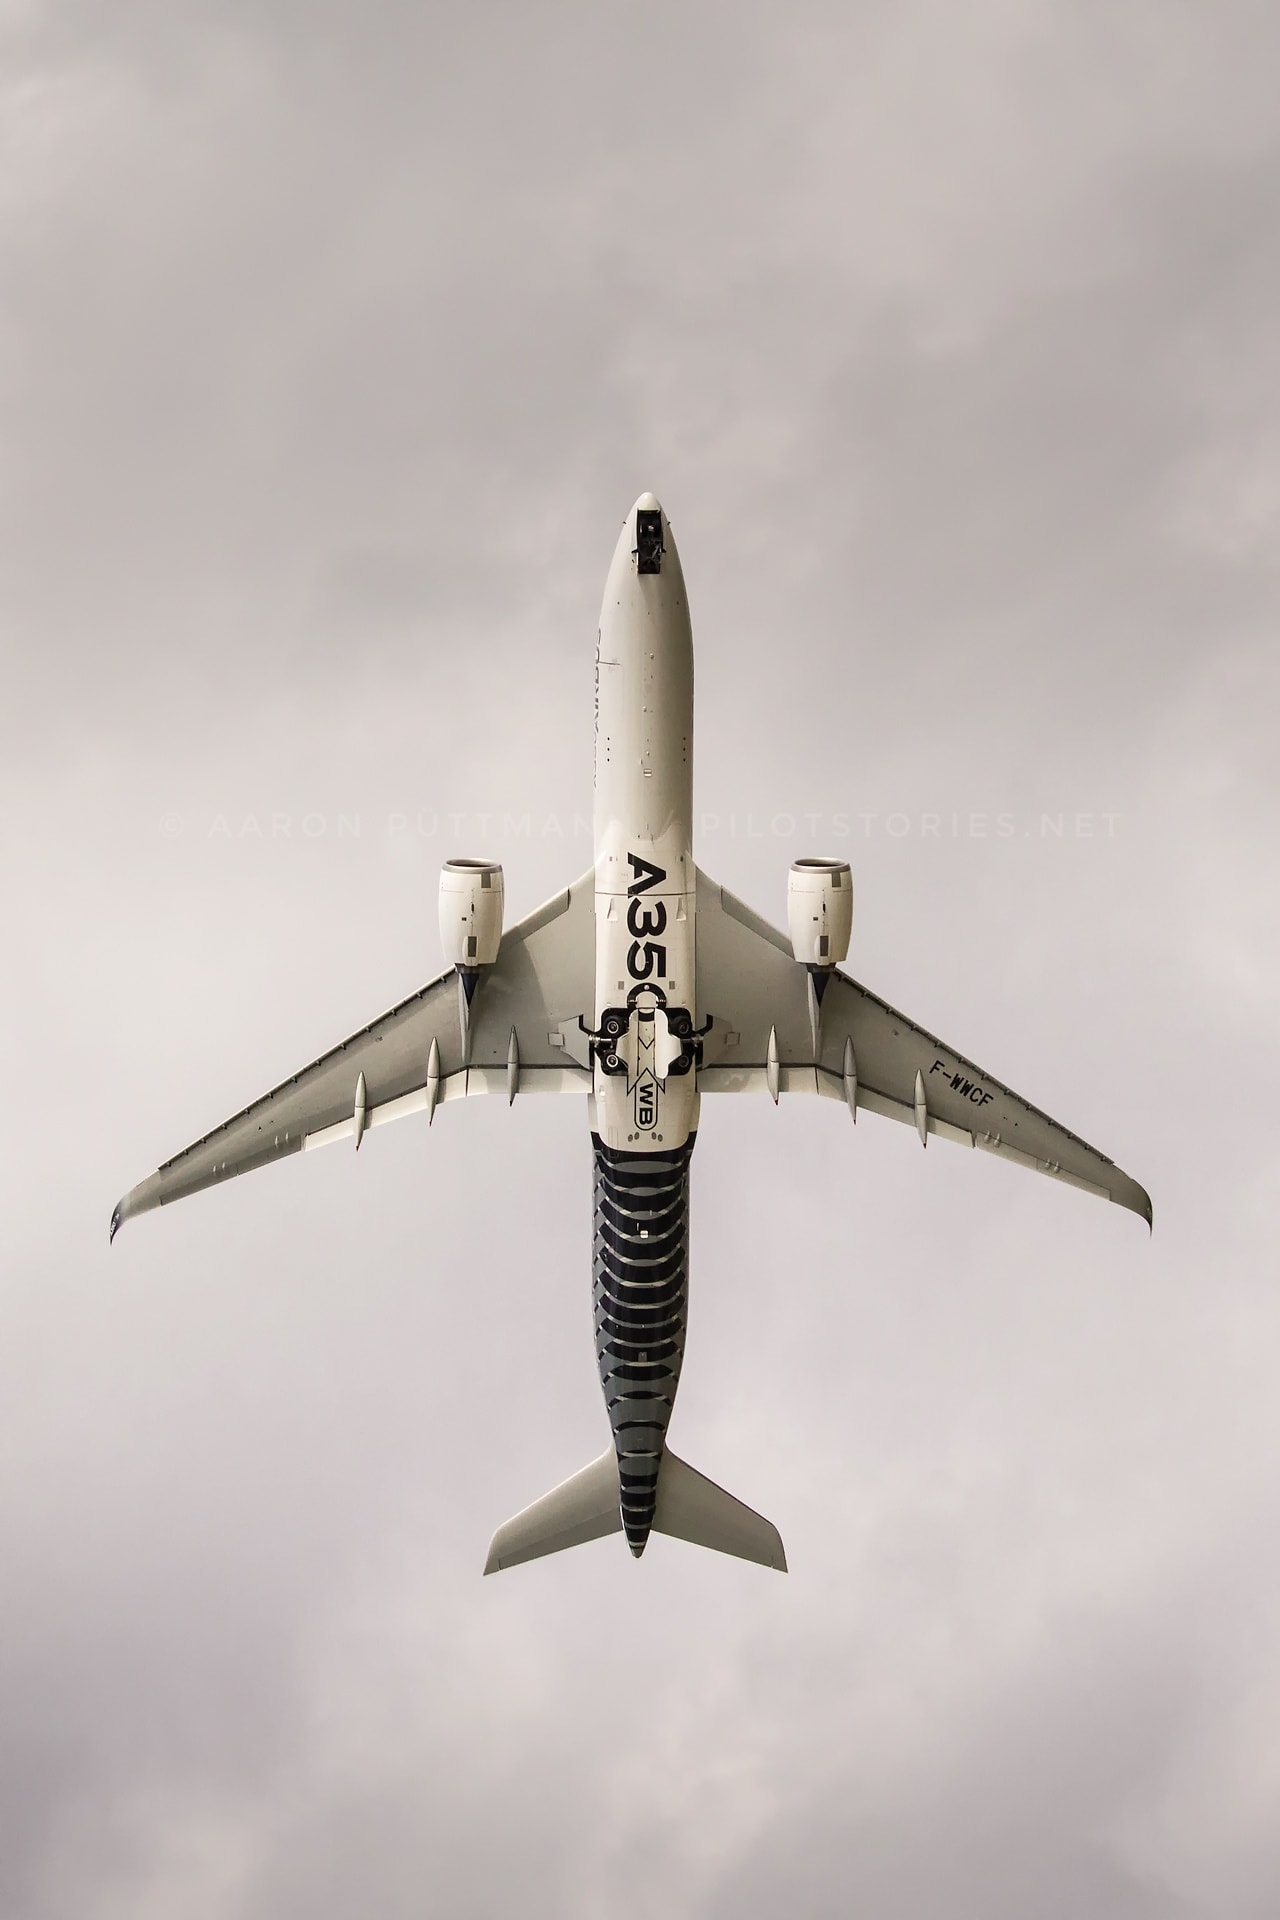 Aircraft wallpapers for your Smartphone (Full-HD)! - Pilotstories